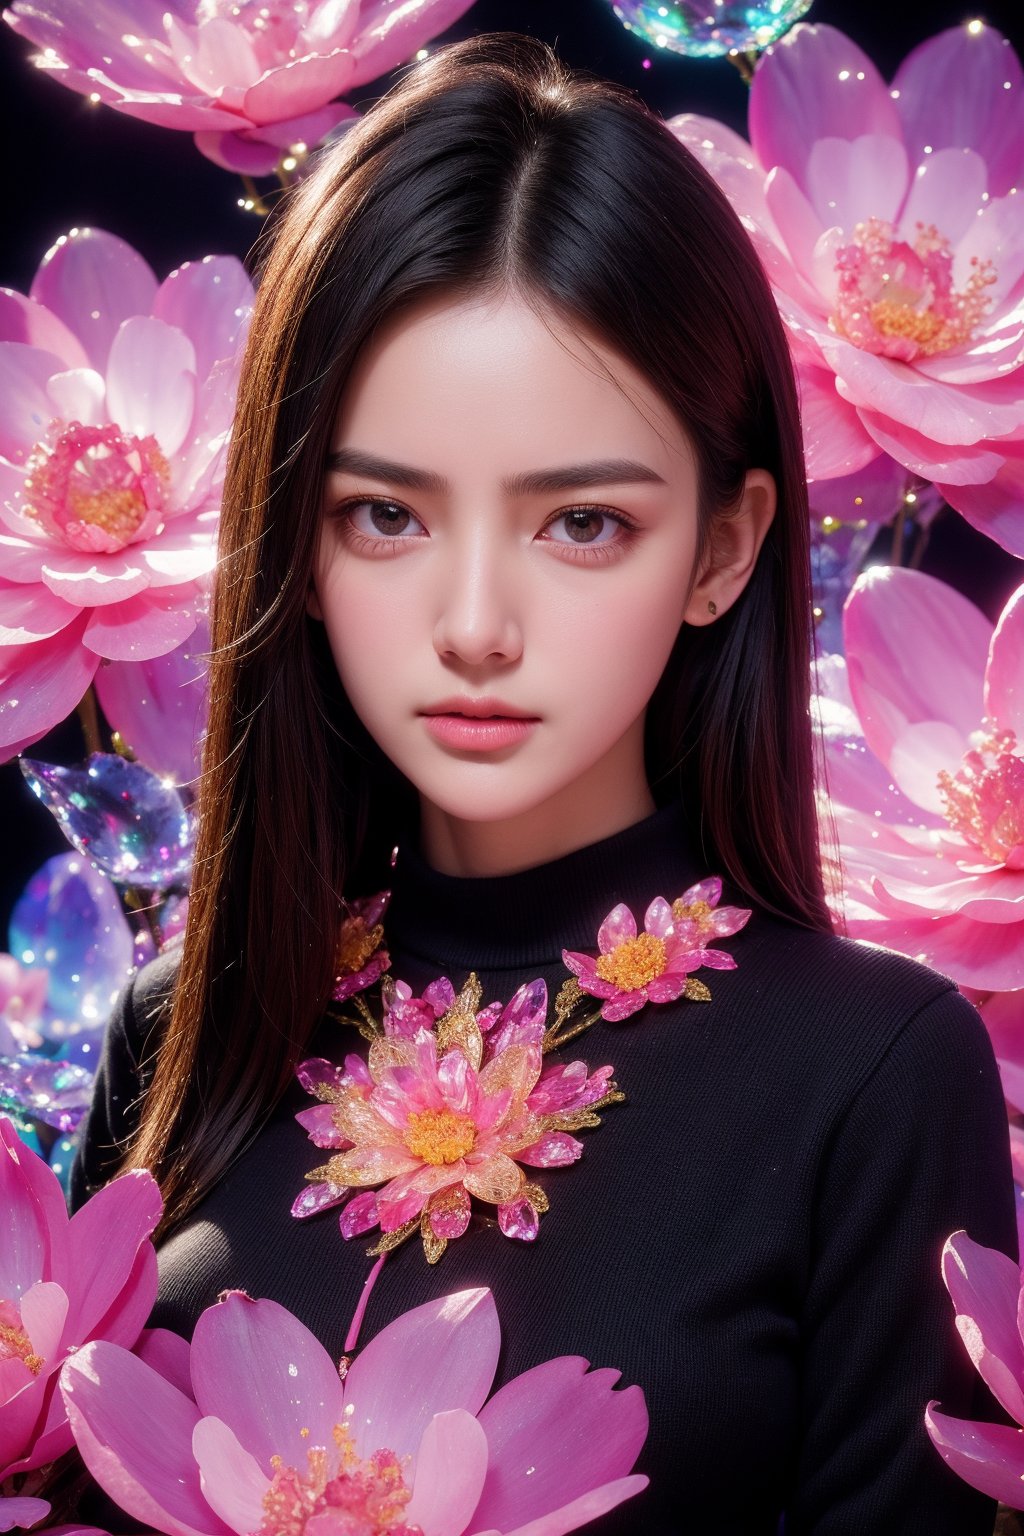 1girl, black background, black eyes, black shirt, black sweater, closed mouth, grey eyes, lips, long hair, long sleeves, looking at viewer, flower, extremely high quality high detail RAW color photo, crystal flower, intricate crystal patterns, translucent petals, prismatic light refraction, sharp, precise edges, detailed textures, luminous glow, 